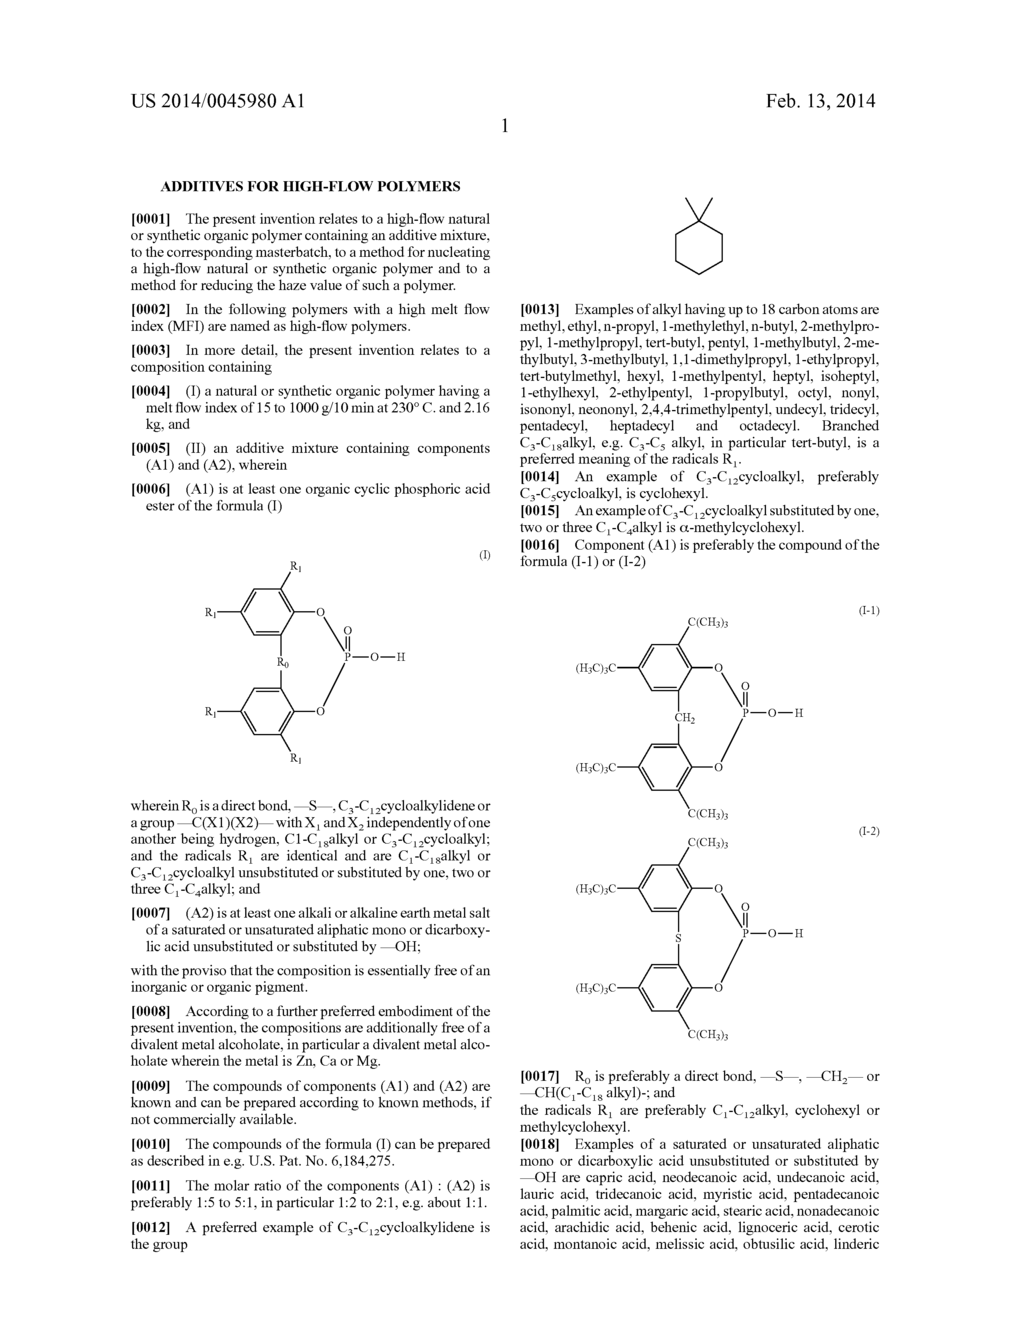 ADDITIVES FOR HIGH-FLOW POLYMERS - diagram, schematic, and image 02